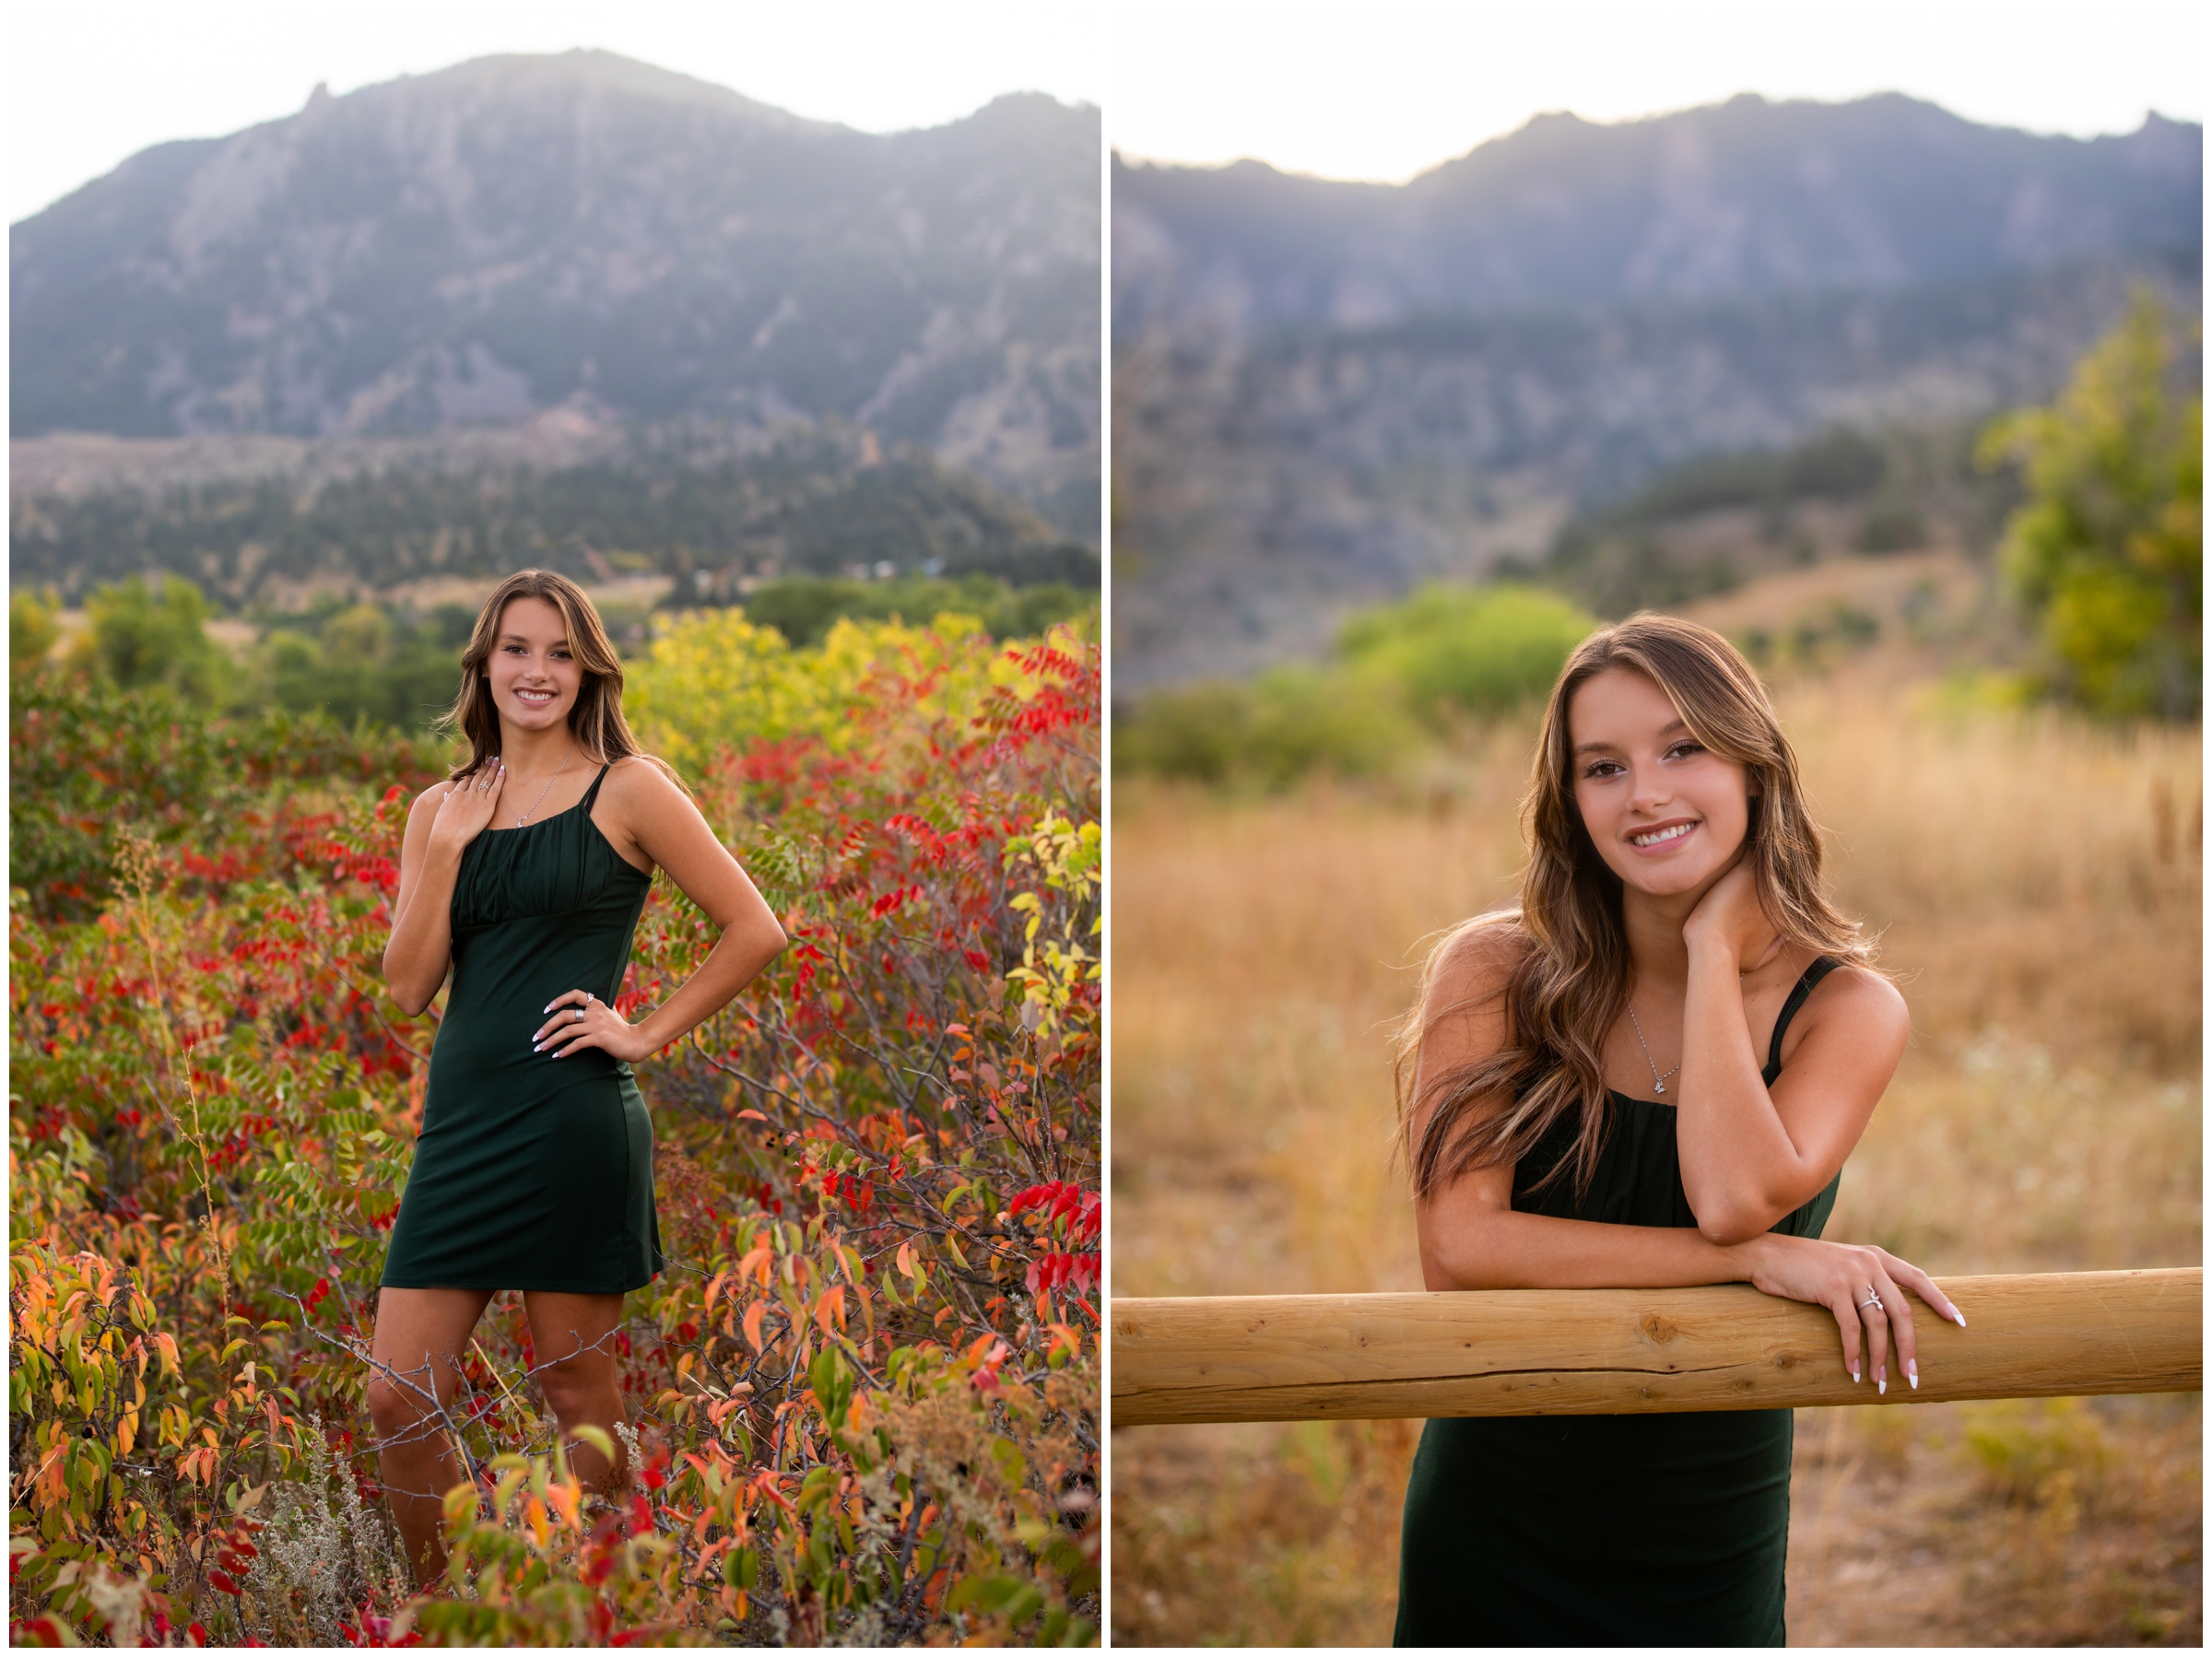 Boulder CO senior photography at South Mesa Trail by Colorado photographer Plum Pretty Photography